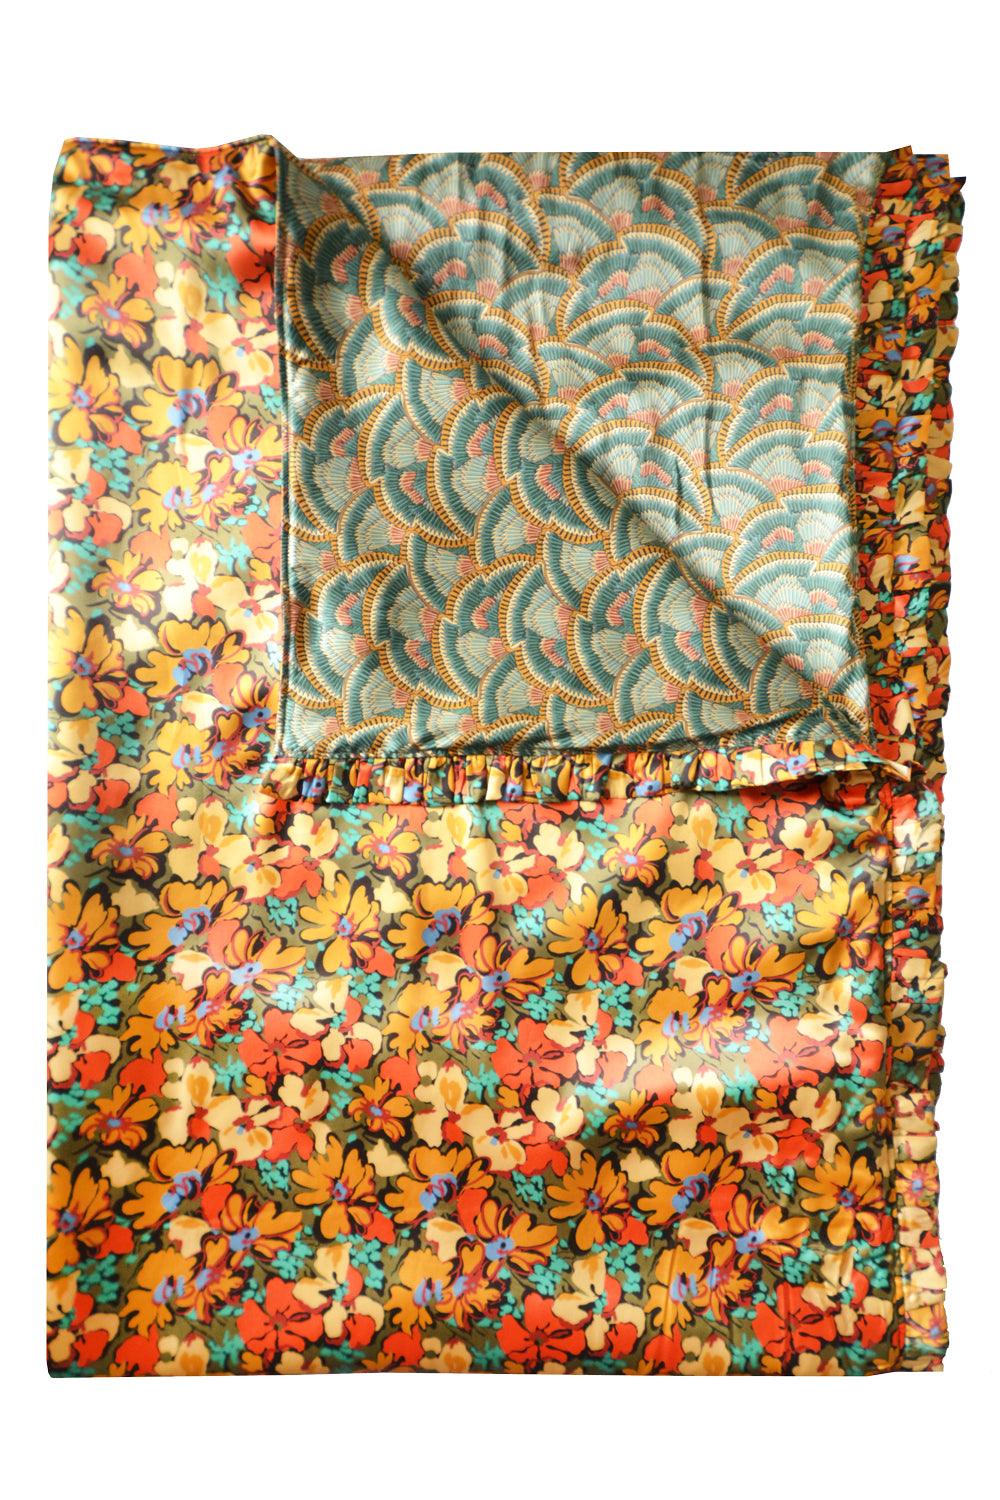 Ruffle Edge Silk Bedspread made with Liberty Fabric ALISON LEWIS & ICARUS WINGS - Coco & Wolf